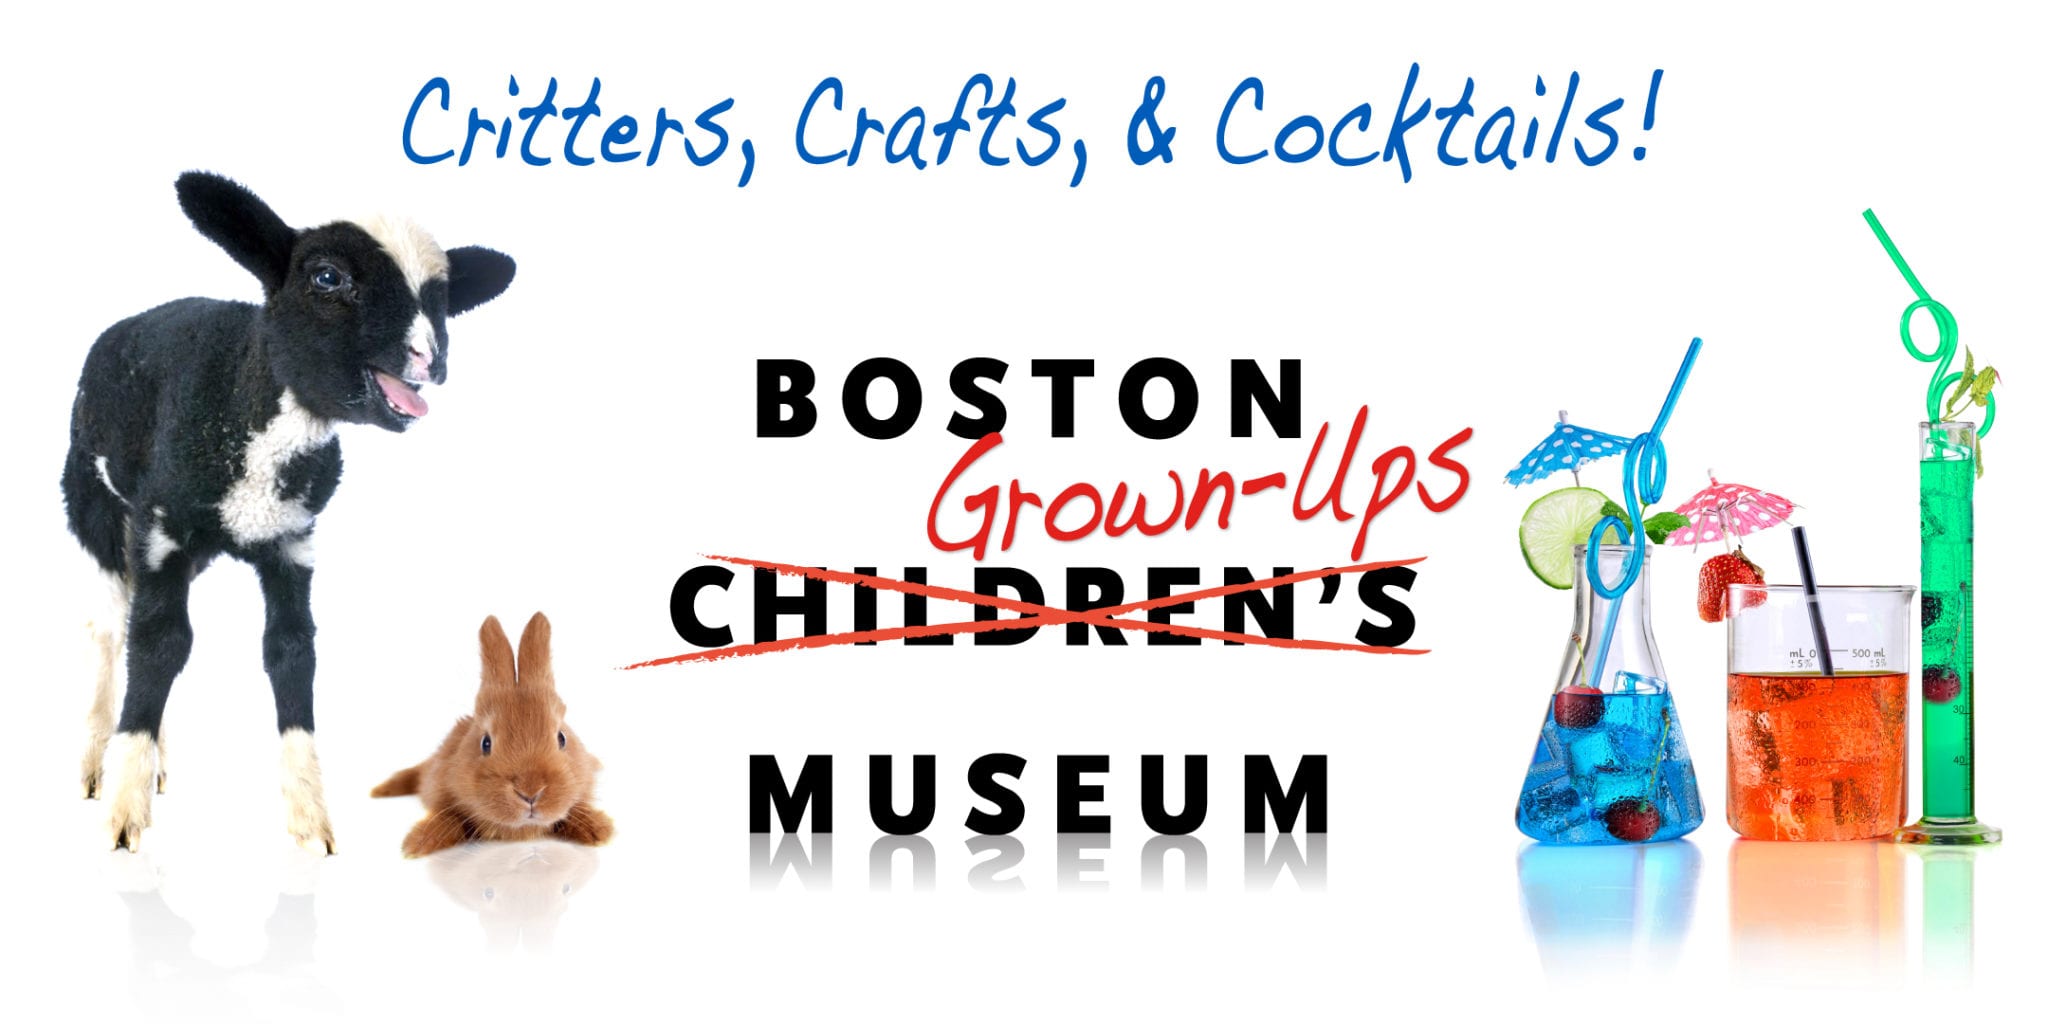 Boston Grown-Ups Museum (21+) - Critters, Crafts & Cocktails